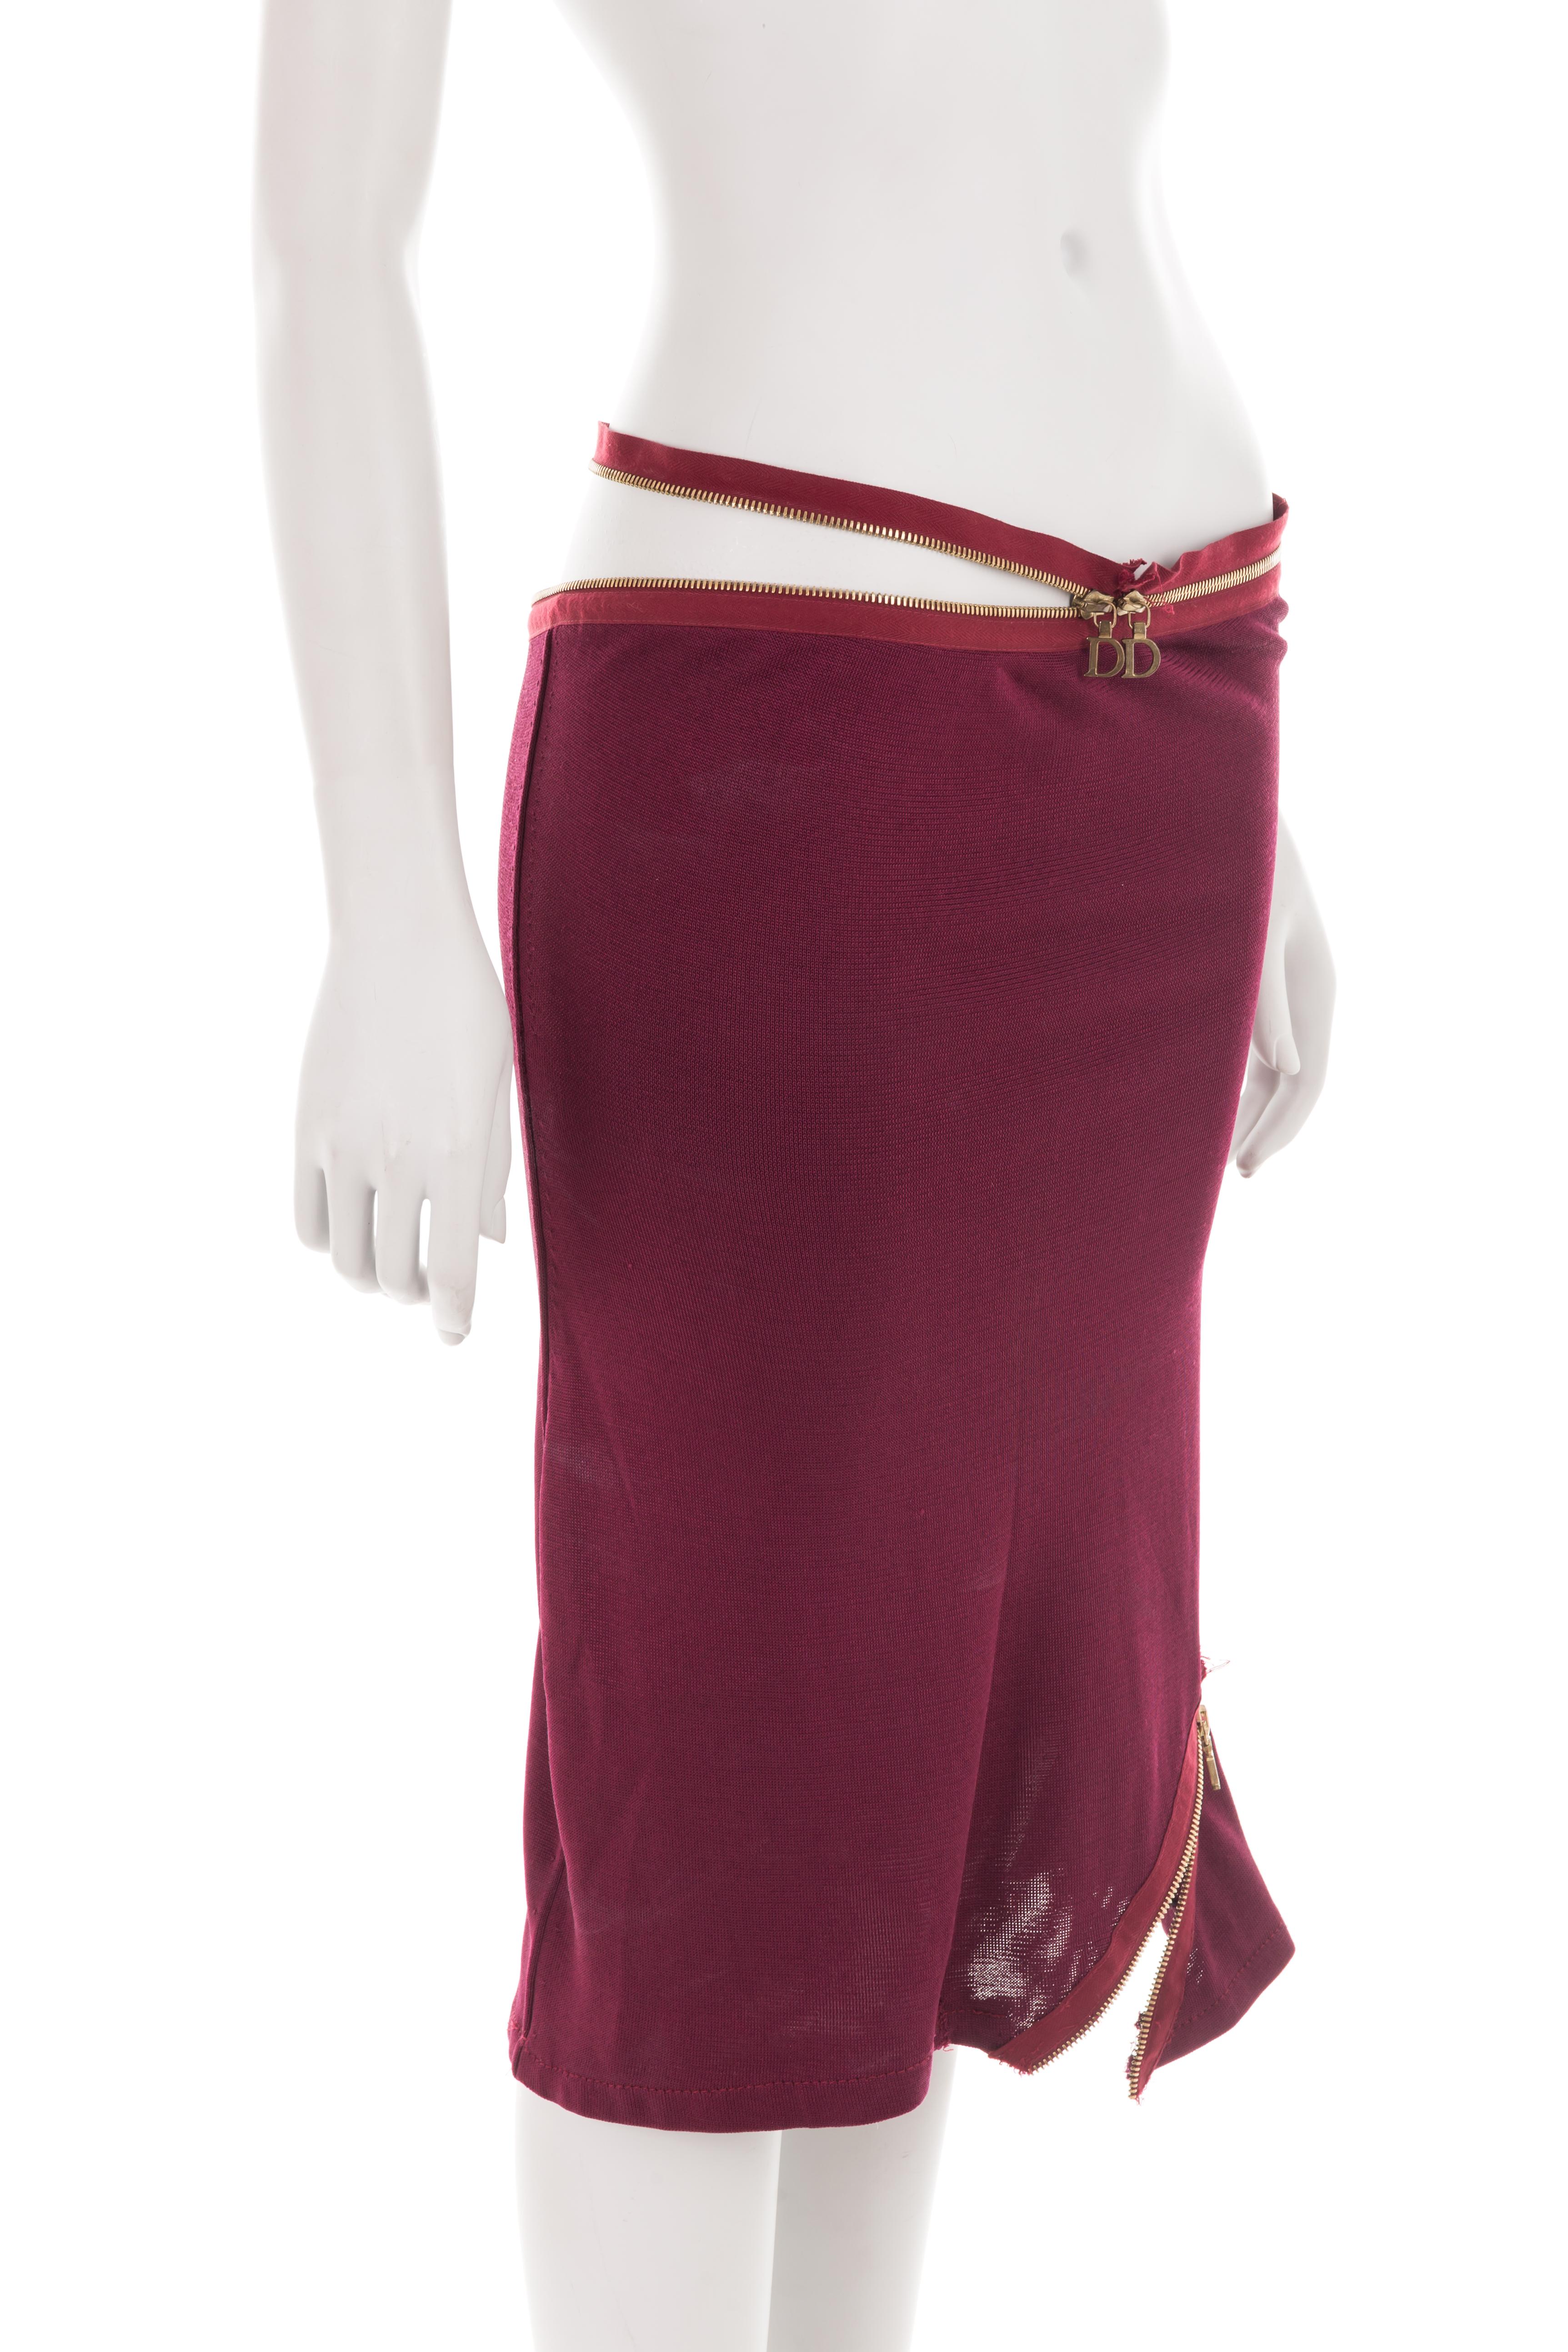 - Christian Dior by John Galliano
- Spring-summer 2001 collection
- Sold by Gold Palms Vintage
- Viscose mix burgundy pencil skirt
- Gold asymmetric zippers
- Adjustable fit
- Size: UK 8 - US 4